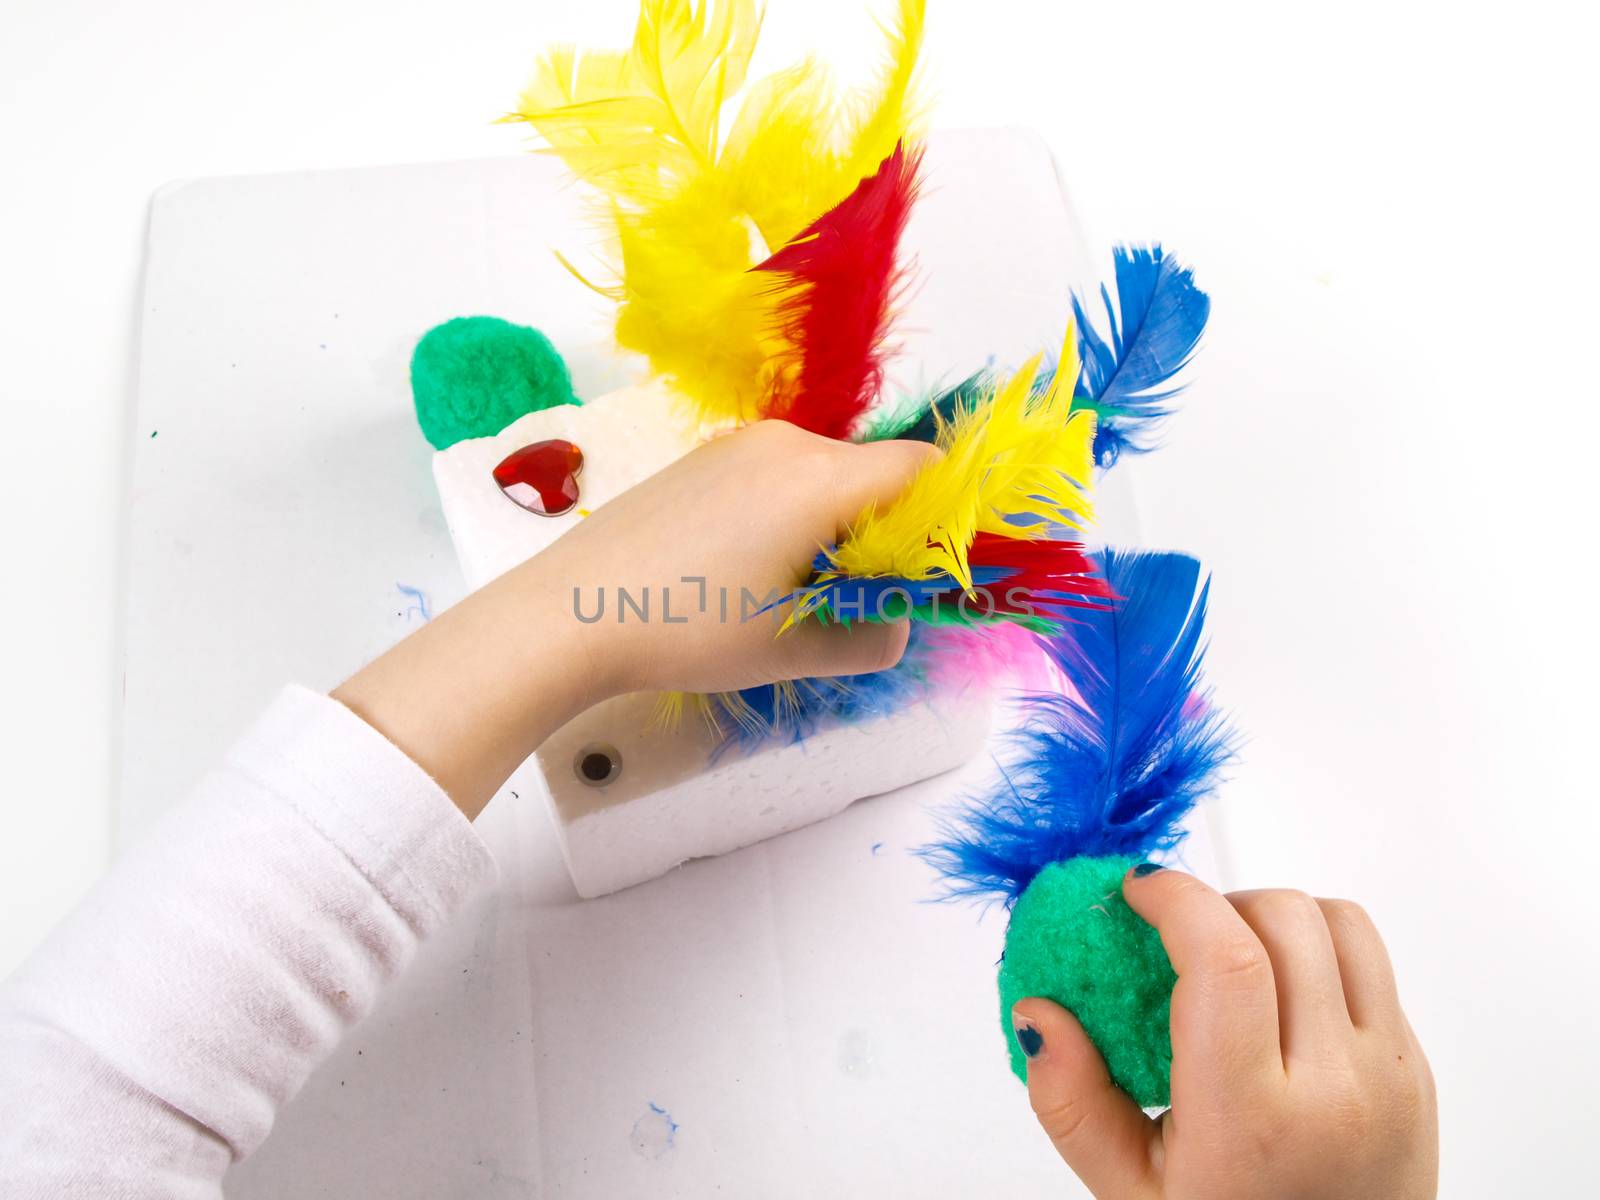 Little girls hands playing with colorful feathers, creating Easter decoration